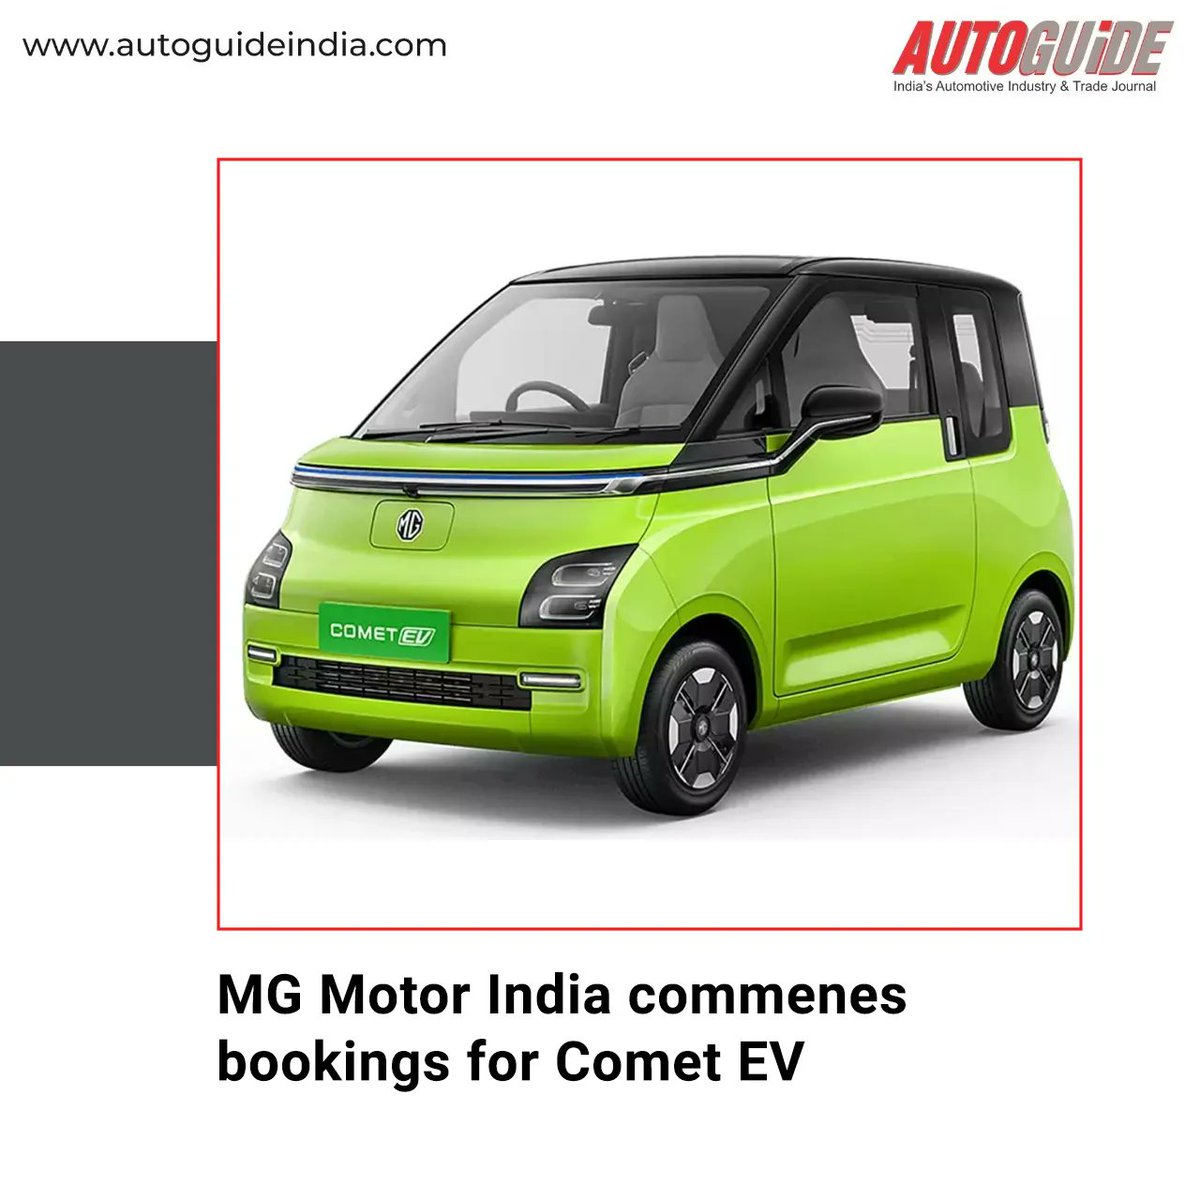 buff.ly/42GJBVt 
MG Motor India announced the commencement of bookings of the MG Comet EV – a Smart EV for Urban Mobility. 

#EV #comet #MG #launch #bookingopen